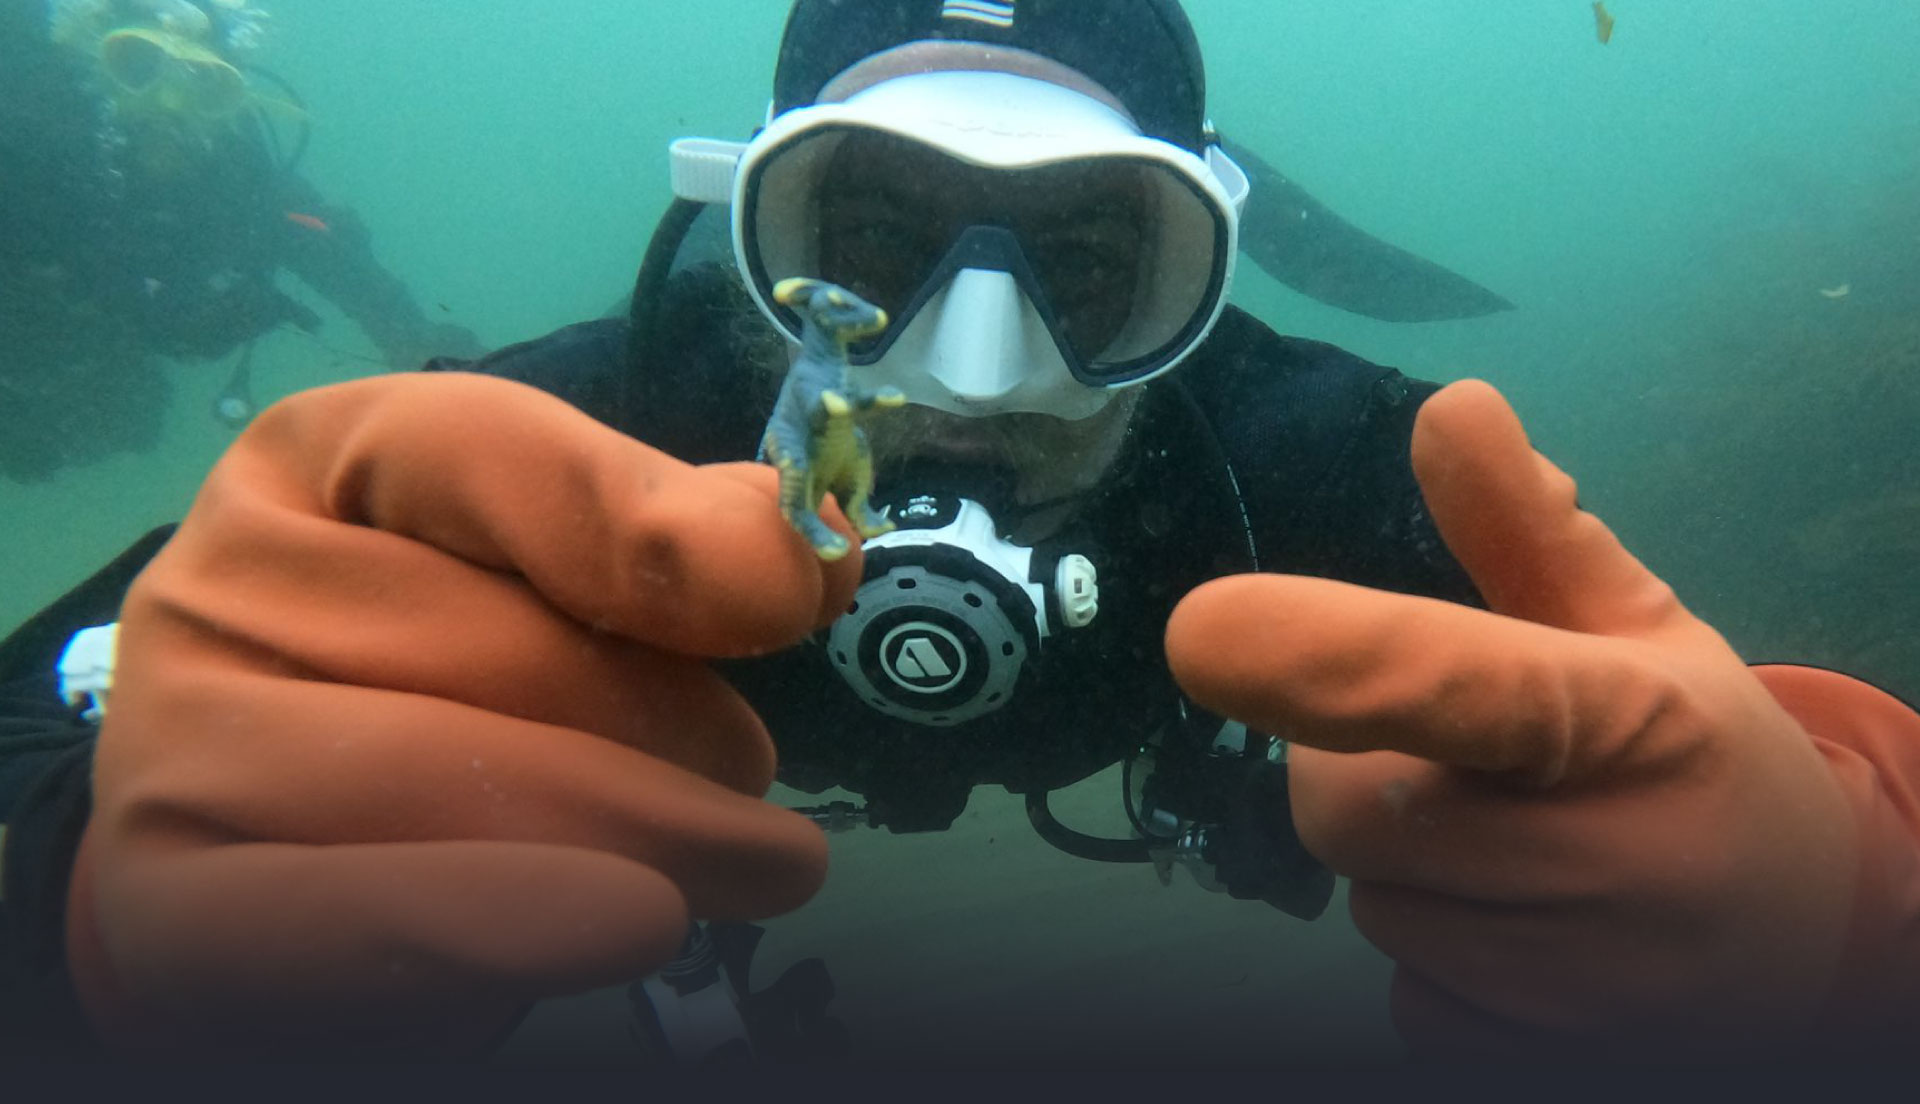 James, our co-founder, holding a toy dinosaur found when eco-diving with The Fifth Point